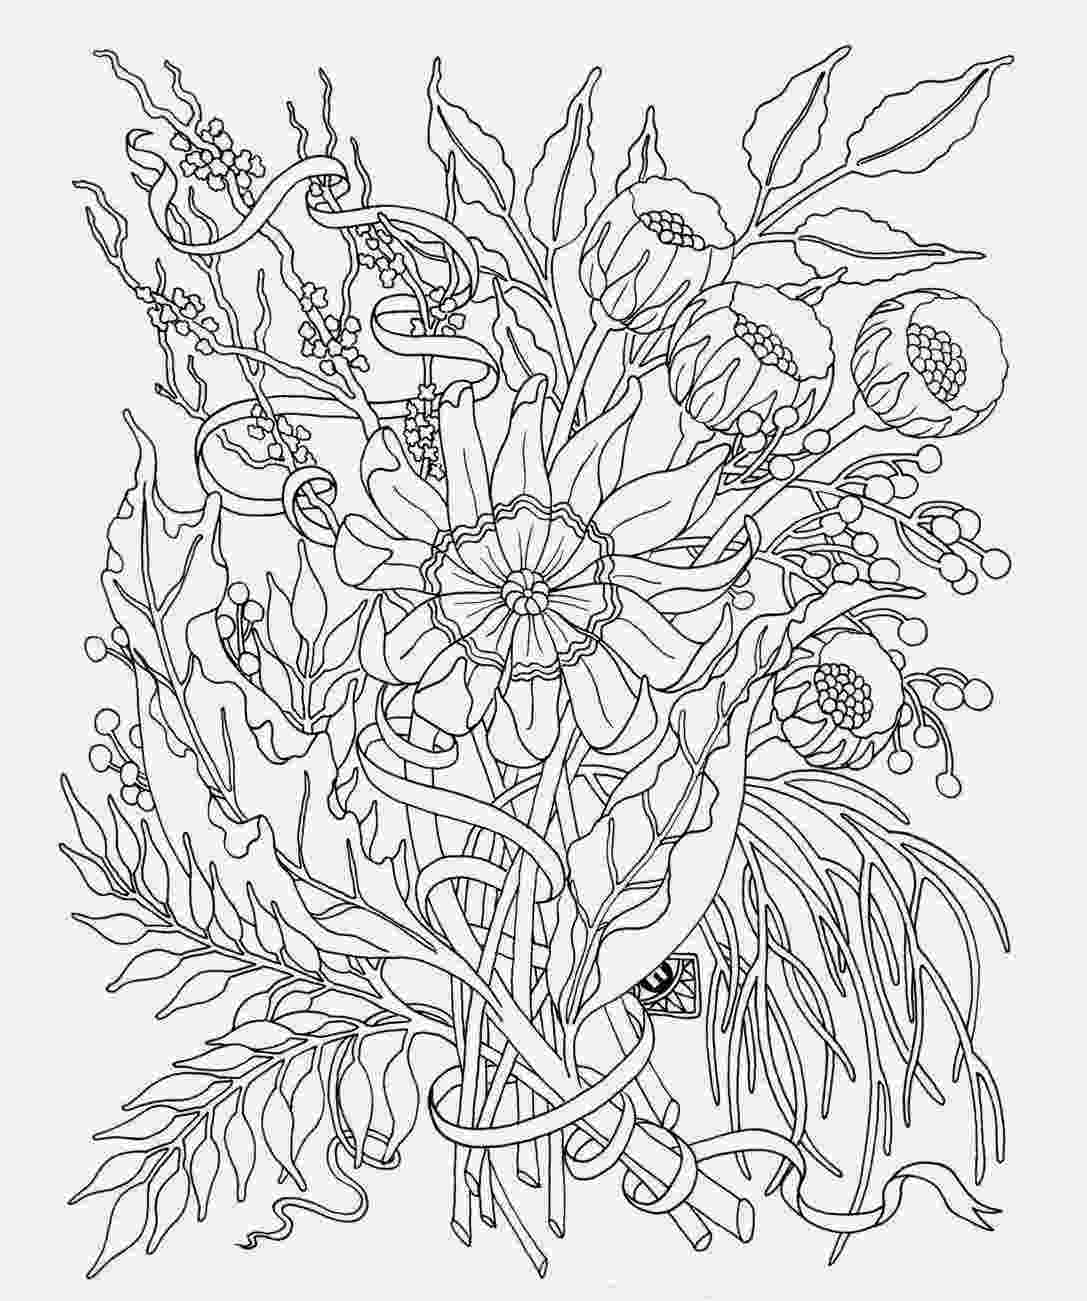 teen coloring sheets coloring pages for teens best coloring pages for kids coloring sheets teen 1 1